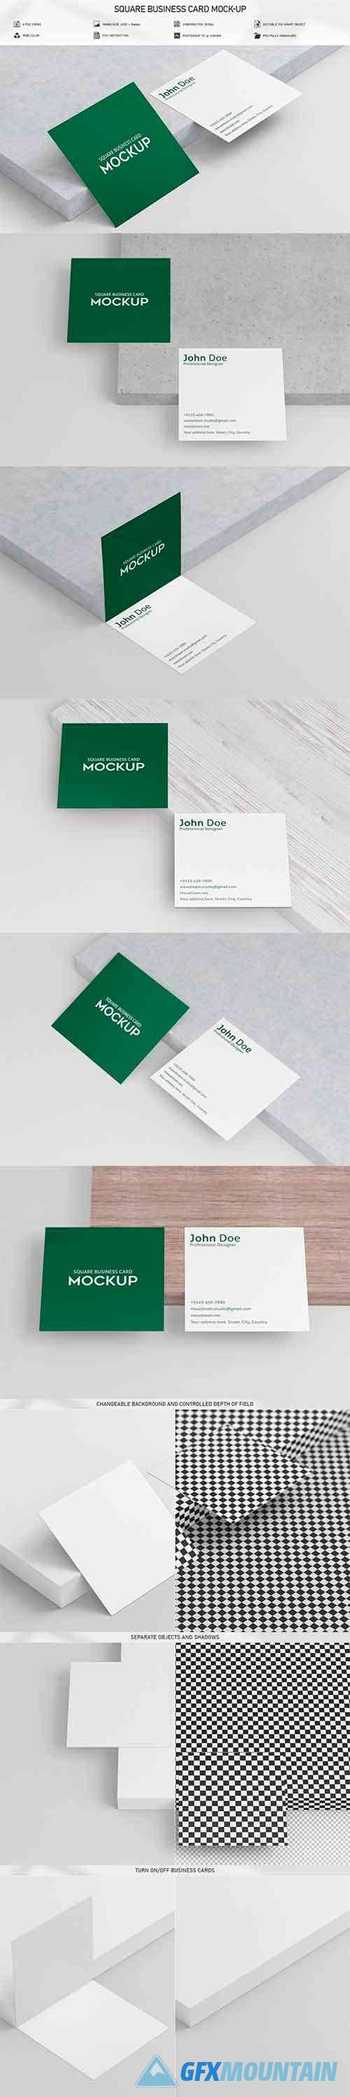 Square Business Card Mock-Up 5832510